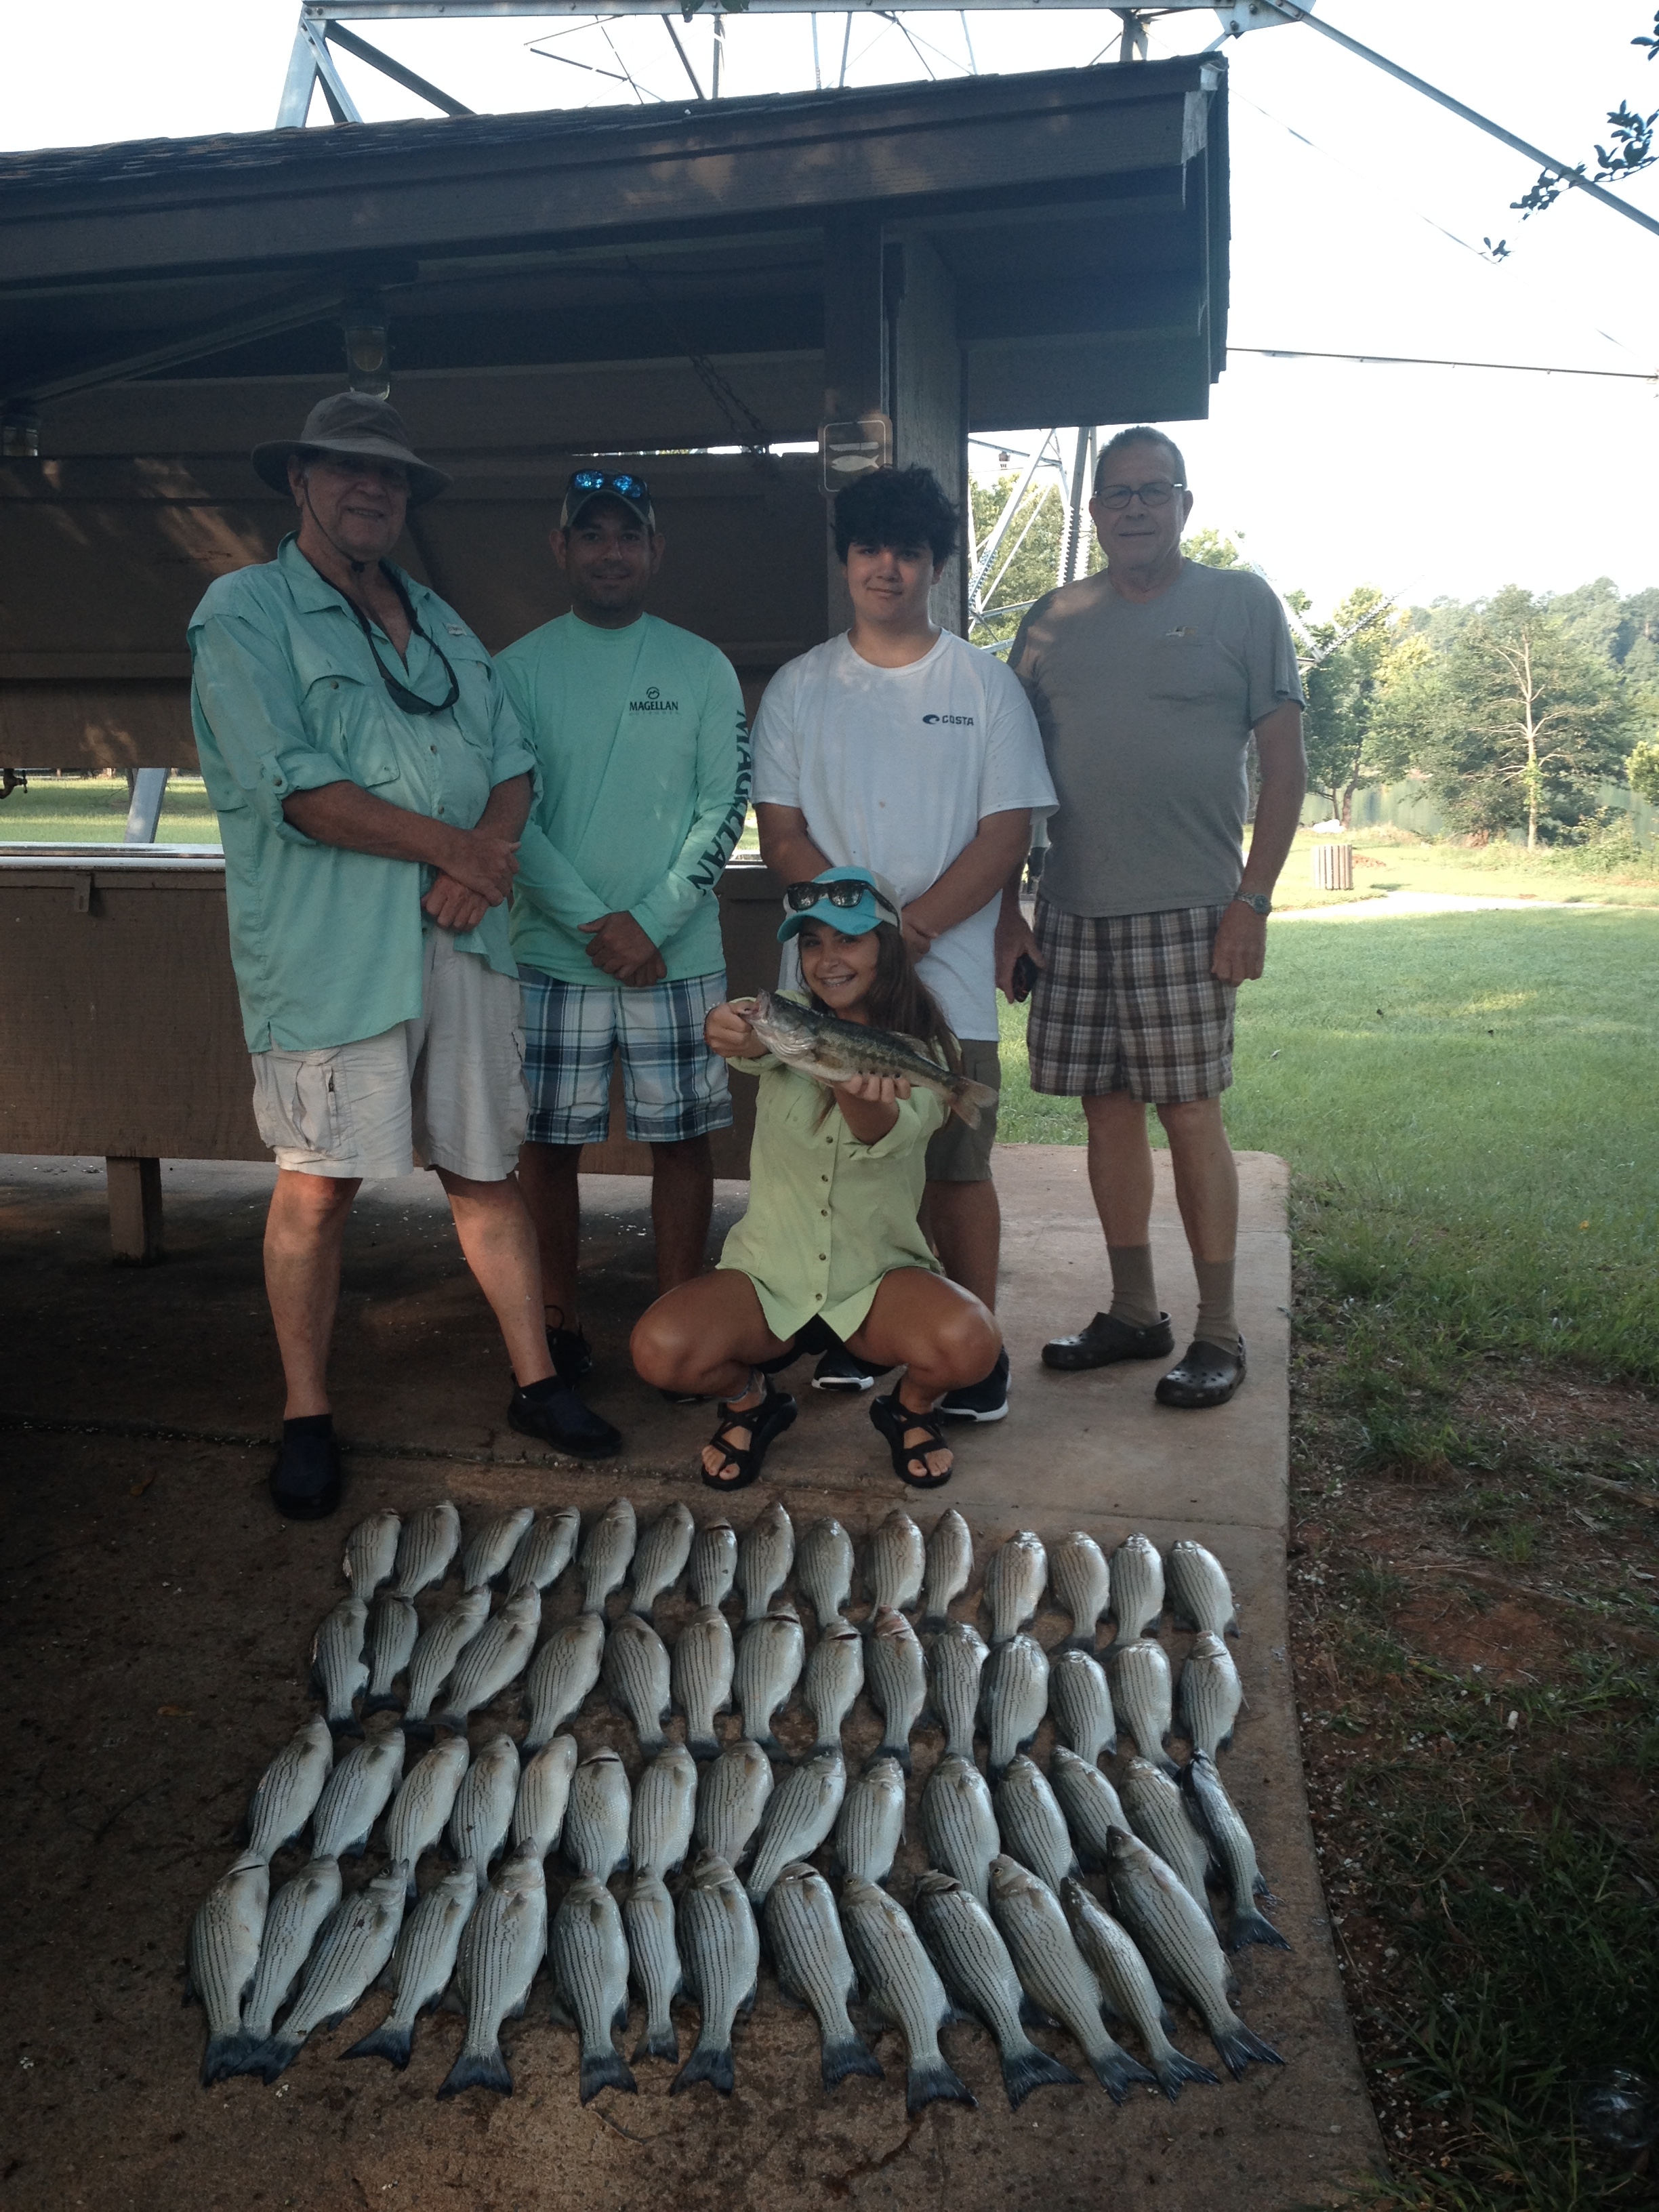 July 8, 2017 RayWalker, Robert Robinson, Reese Perez, Ronnie Walker, and Daphne Walker with their limit of stripers and hybrids